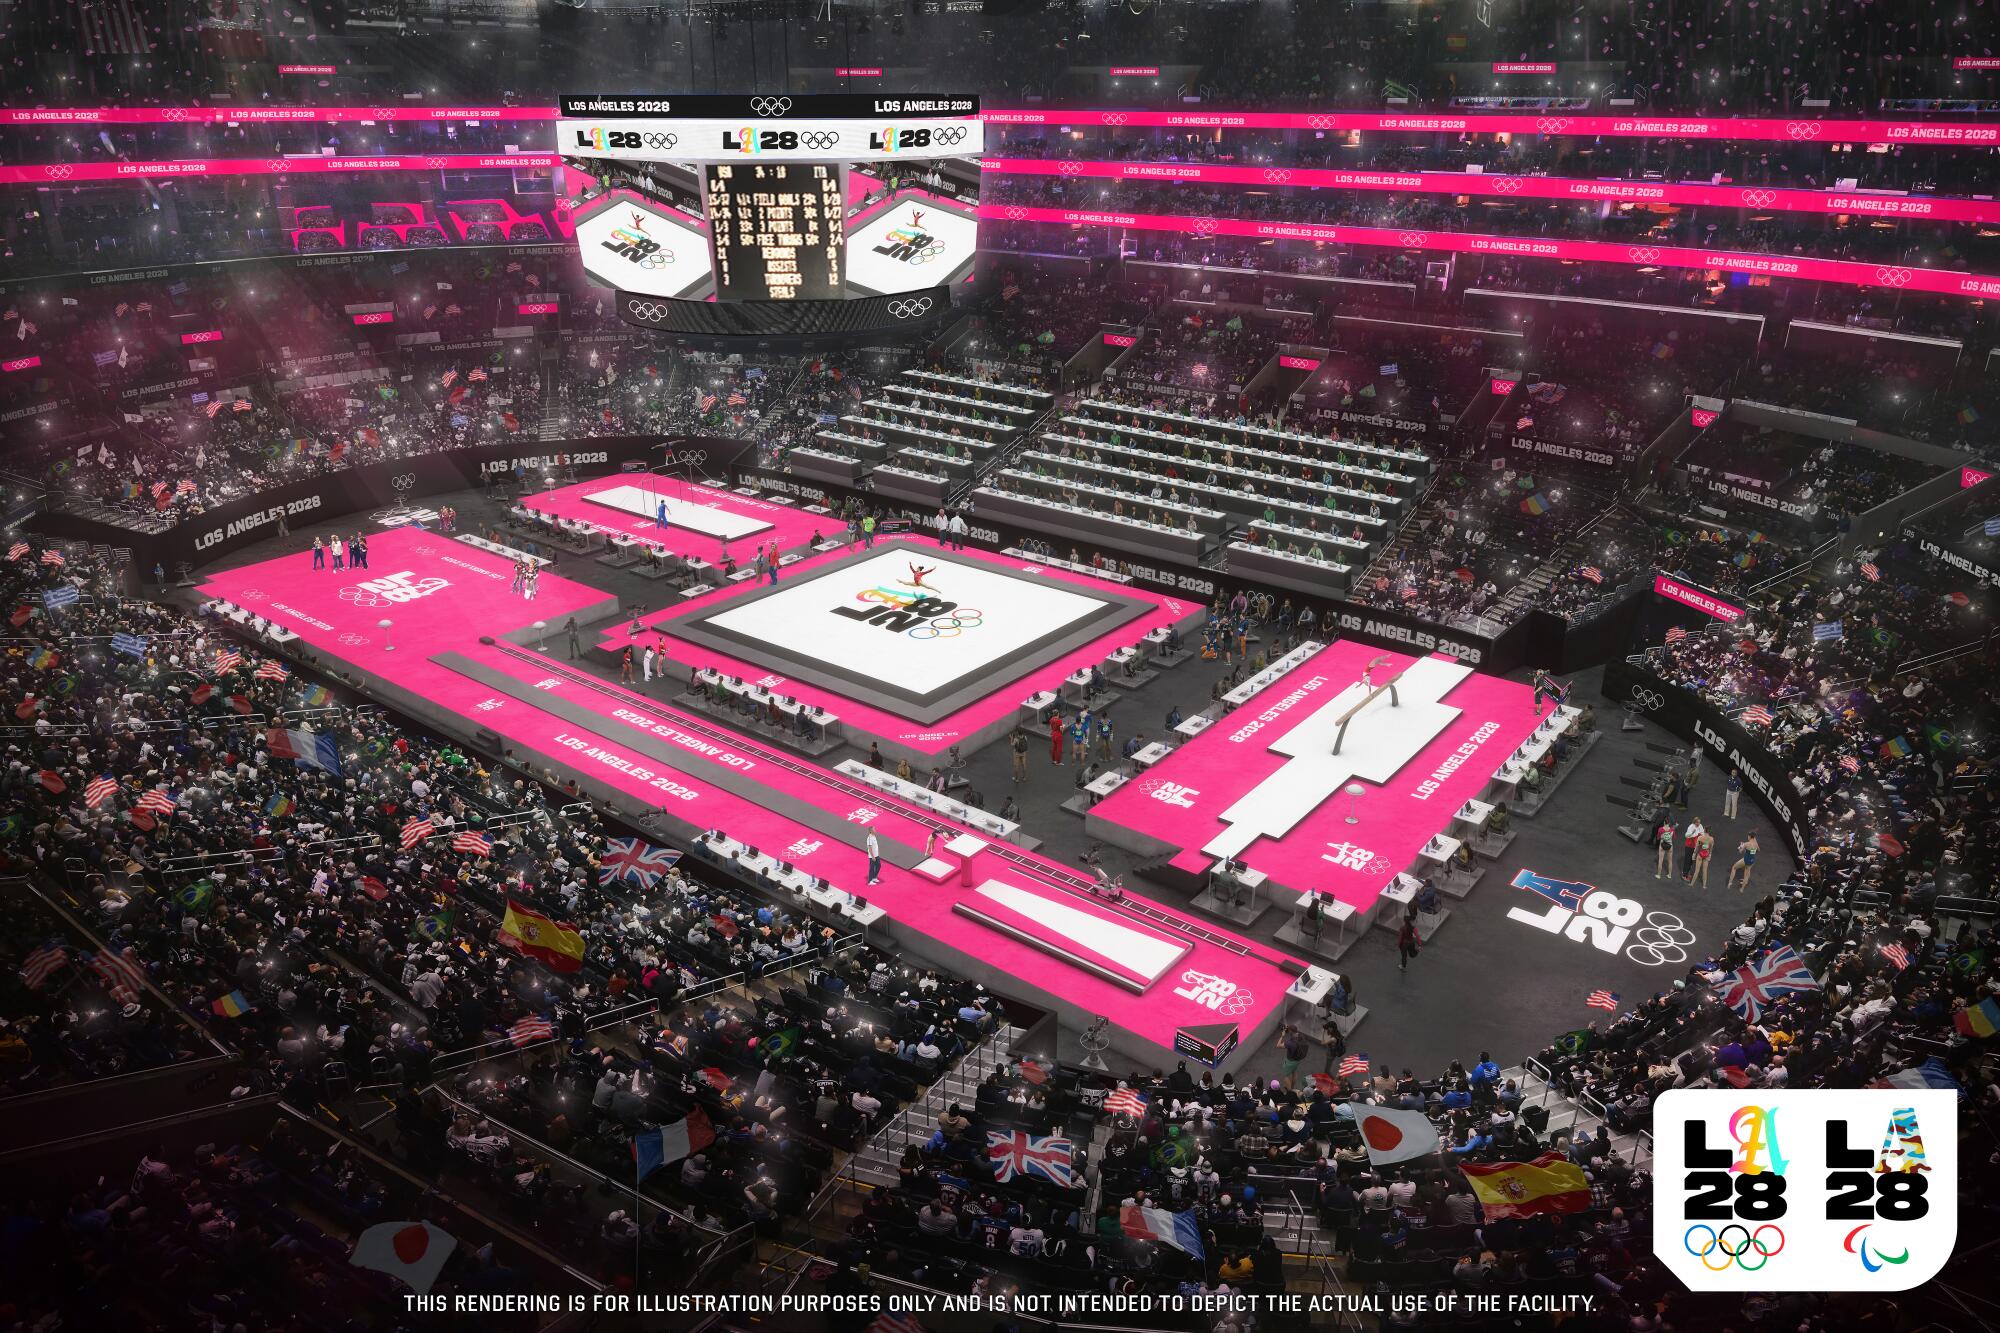 An artist's rendering shows the 2028 Los Angeles Olympics gymnastics competition under neon pink lights at Crypto.com Arena.